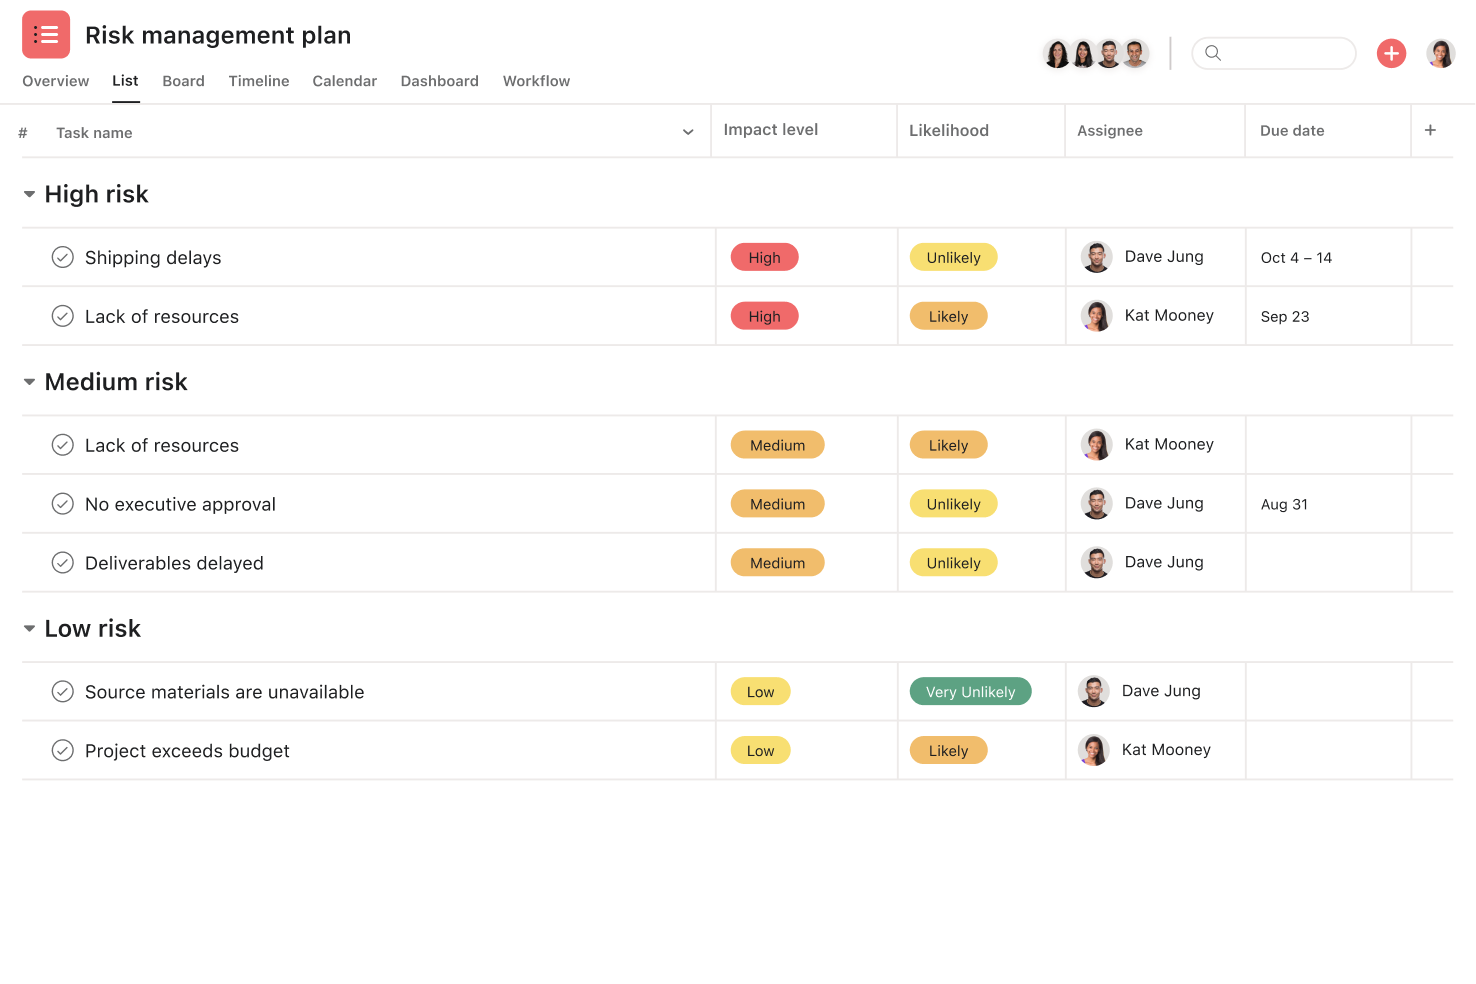 [product ui] risk management plan template in Asana (list view)